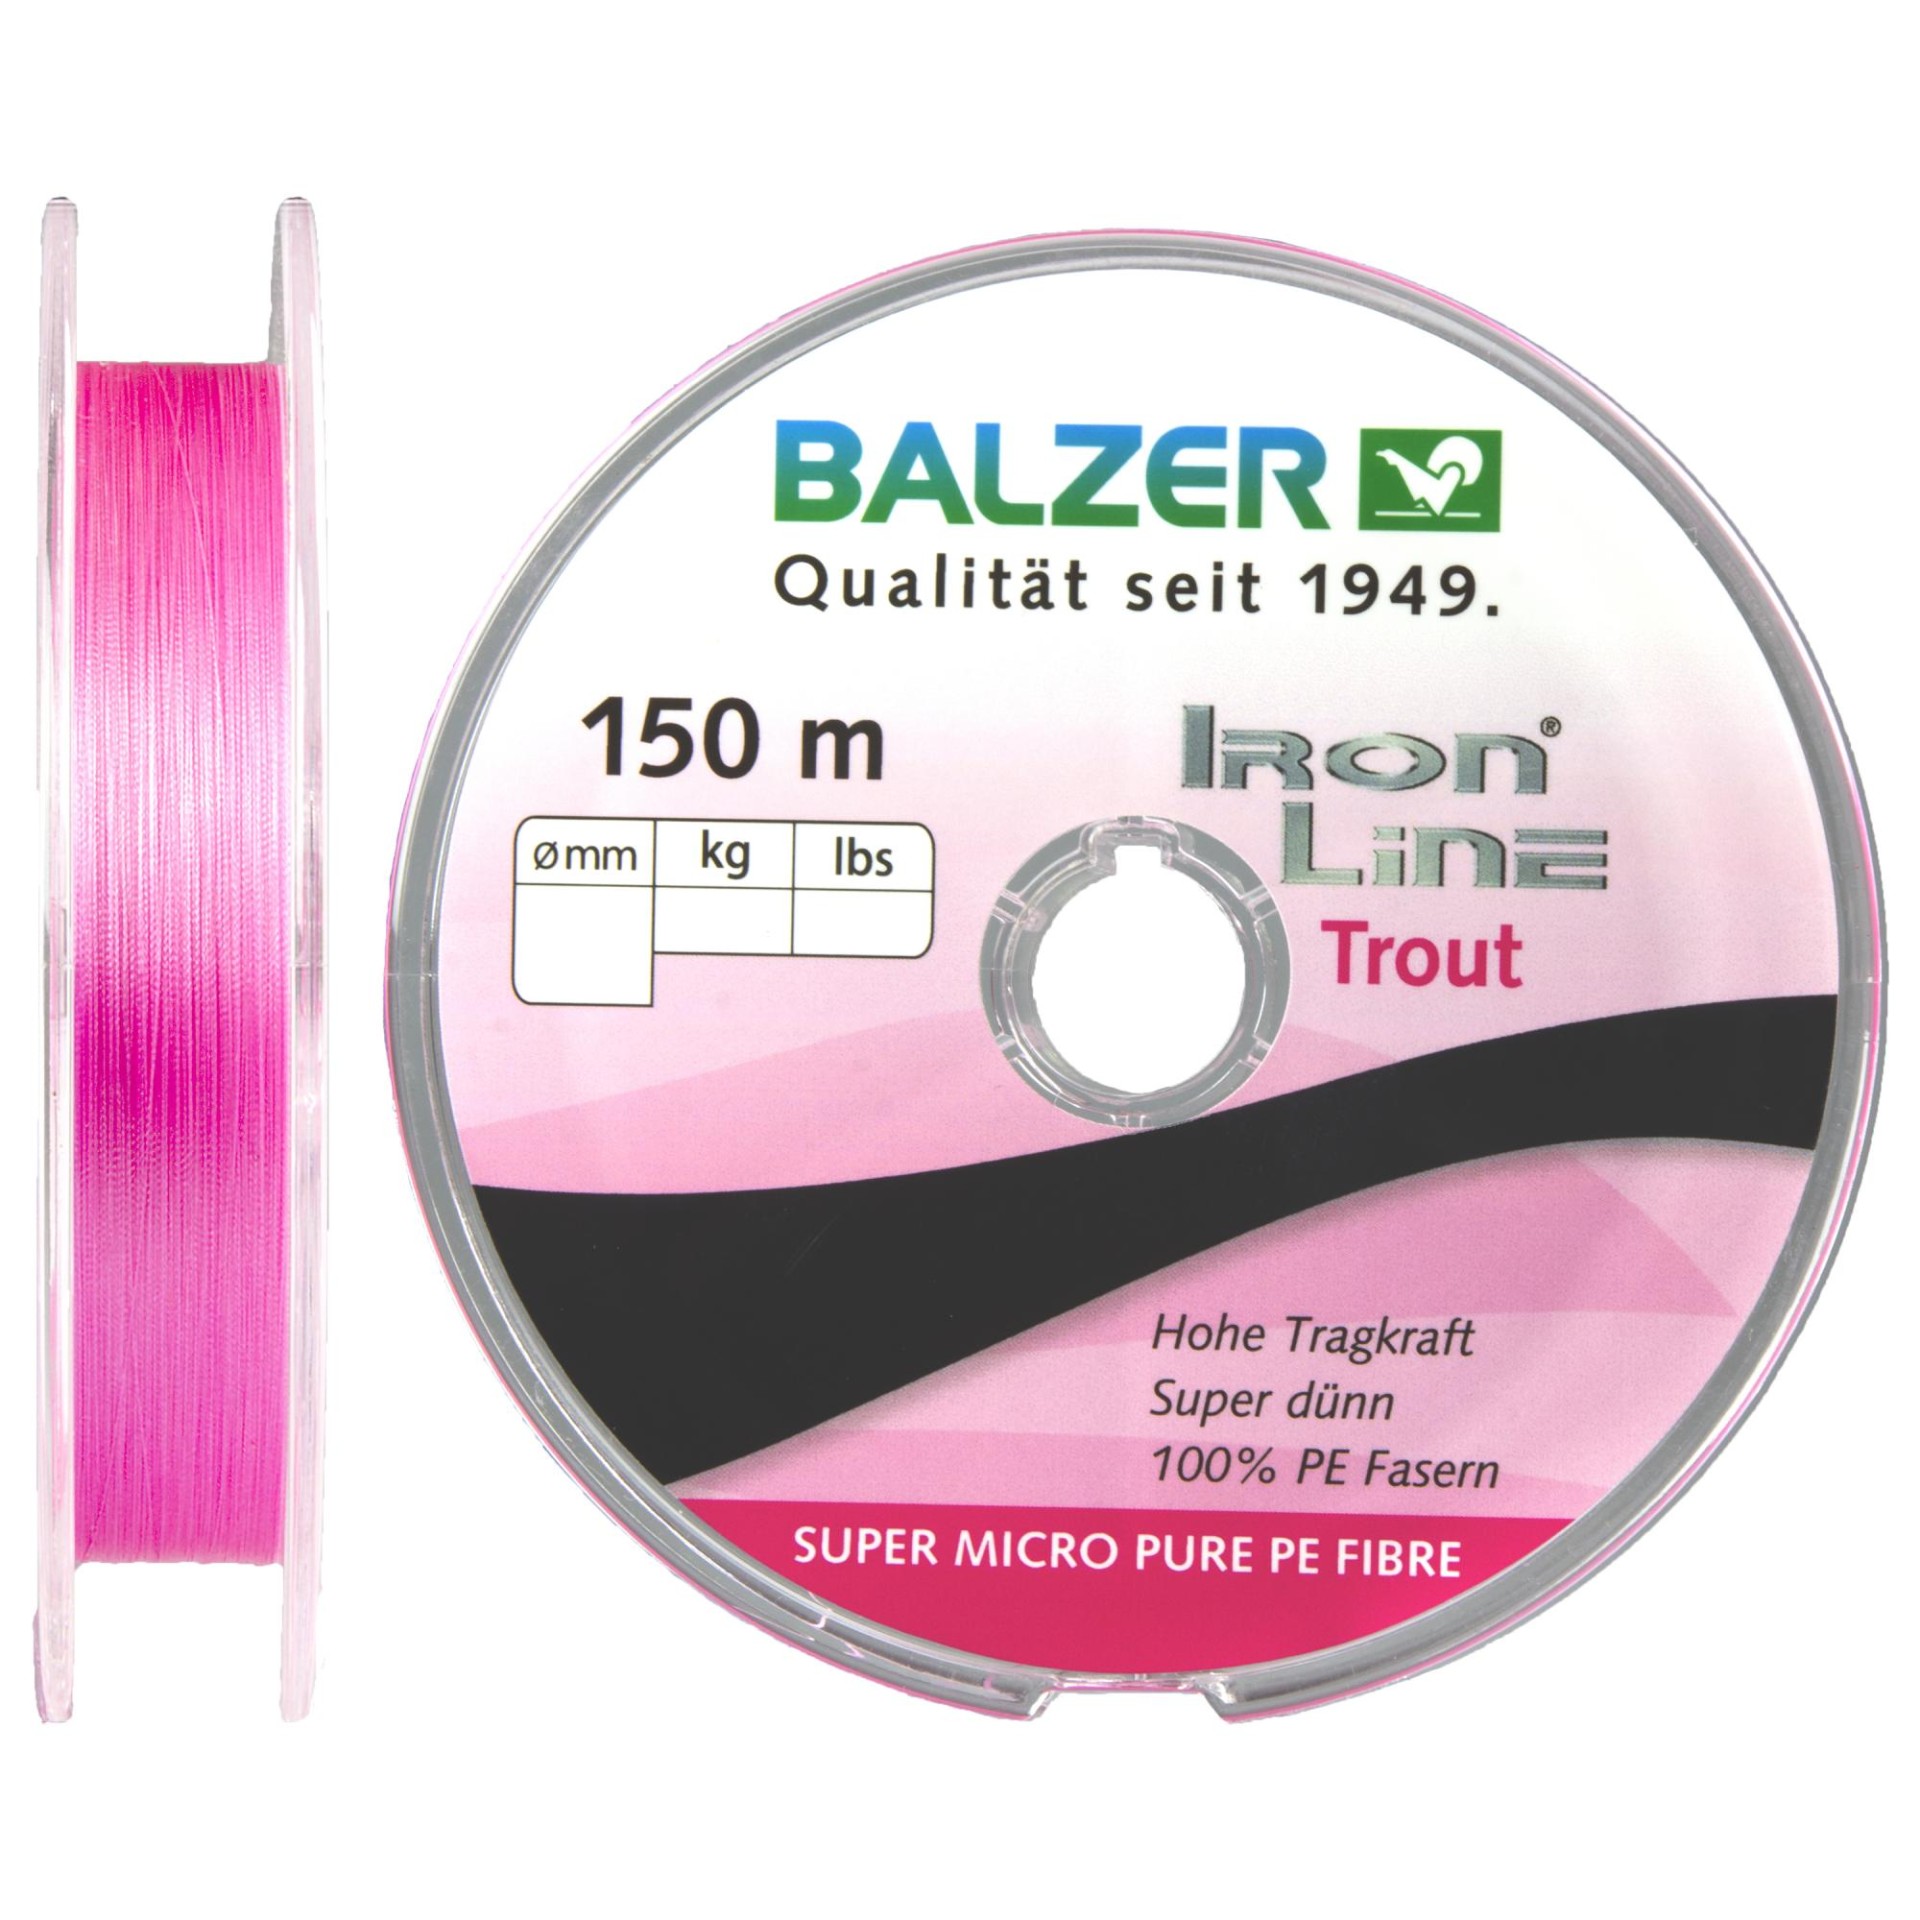 Balzer Fishing Line Iron Line 8 (multicolor, 1.500 m) at low prices